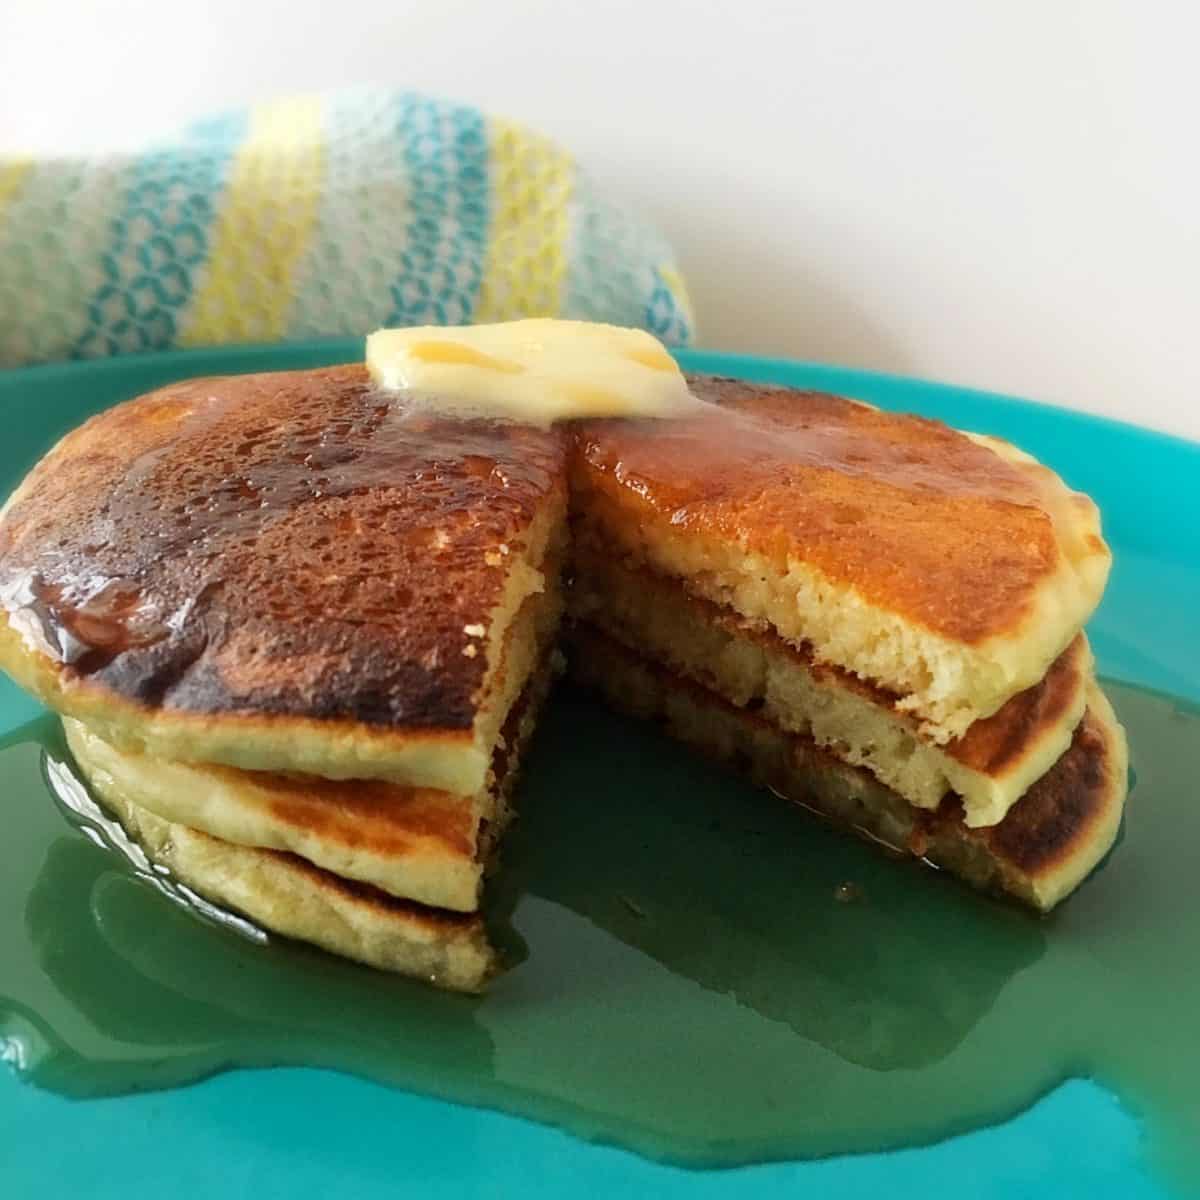 Homemade Pancake Recipe. Simple and delicious breakfast recipe. Perfect for dinner too! Plus you can make ahead and freeze for later!